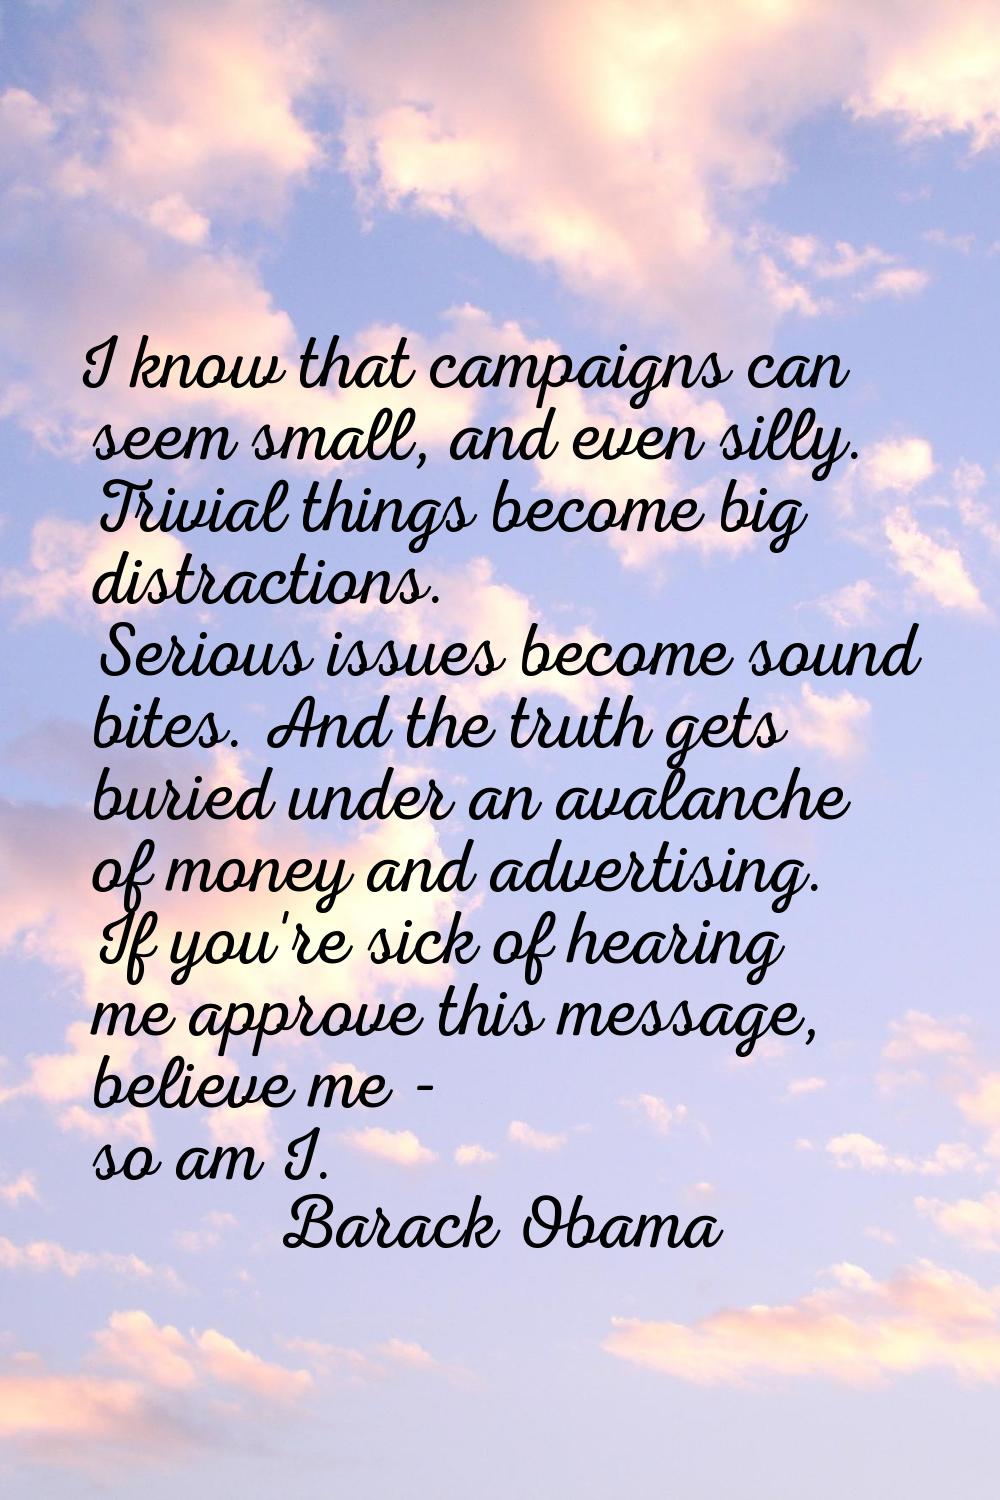 I know that campaigns can seem small, and even silly. Trivial things become big distractions. Serio